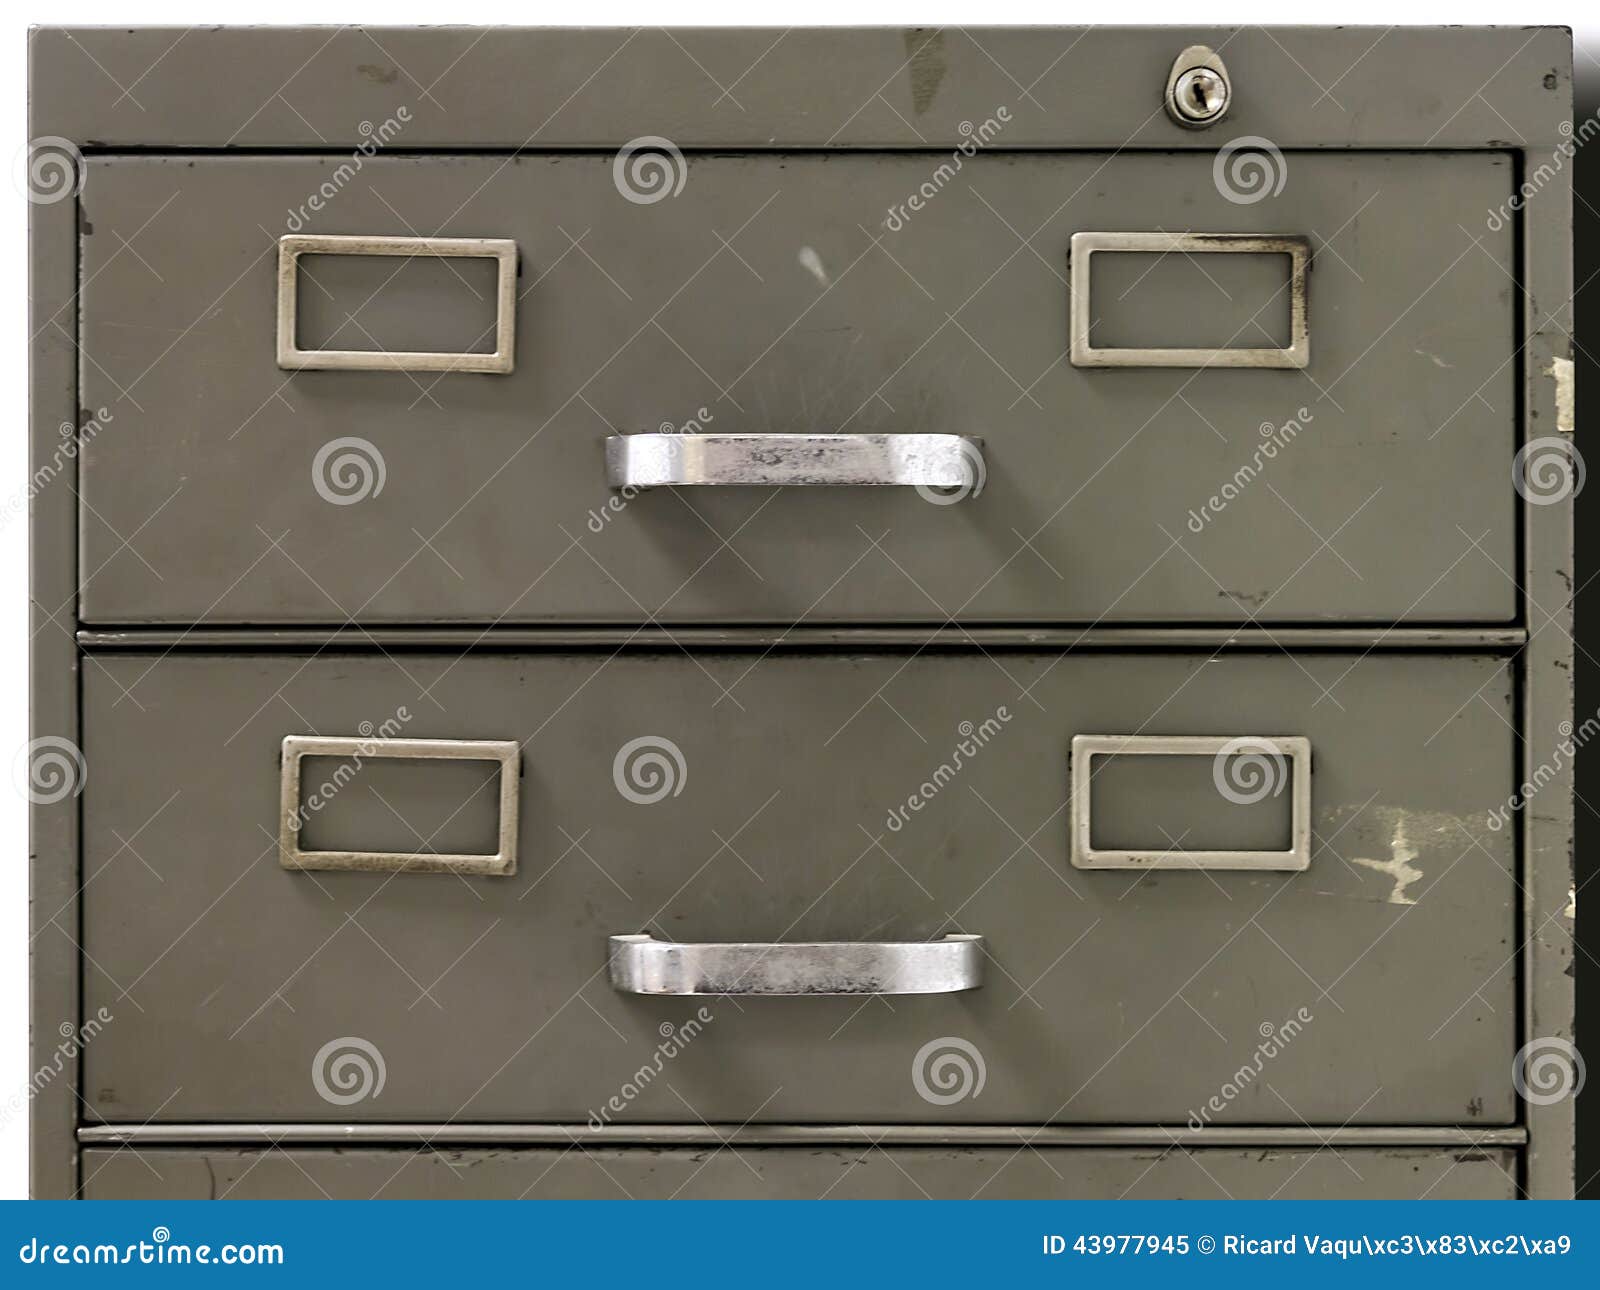 Drawers Of An Old Metal Filing Cabinet Stock Image Image Of